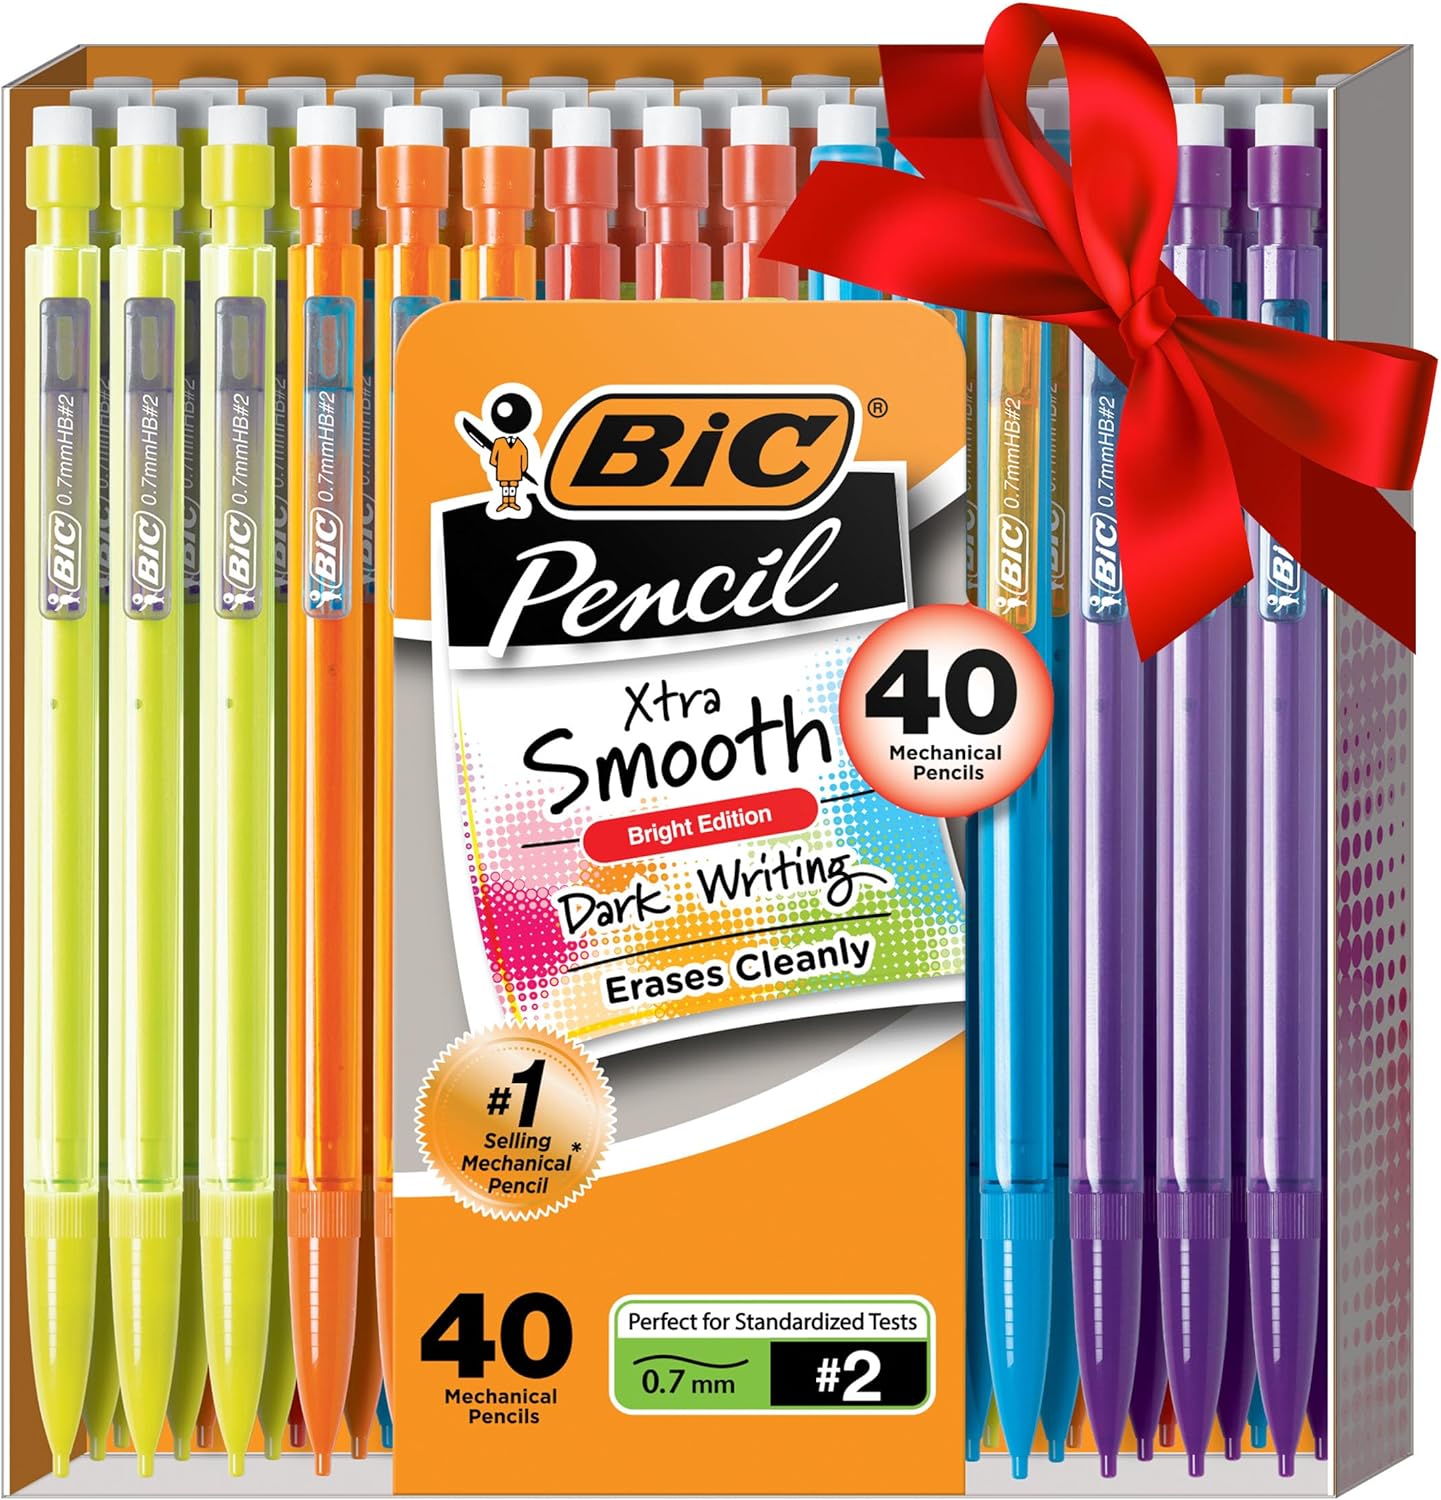 I was stunned at the price for a big pack of pencils like this. They are great for the school year. Very smooth, good quality graphite, easy to use. Love the bright colors. The only complaint I have is they aren't very ergonomic. I assume hands will get sore after holding the pencil for a long time.